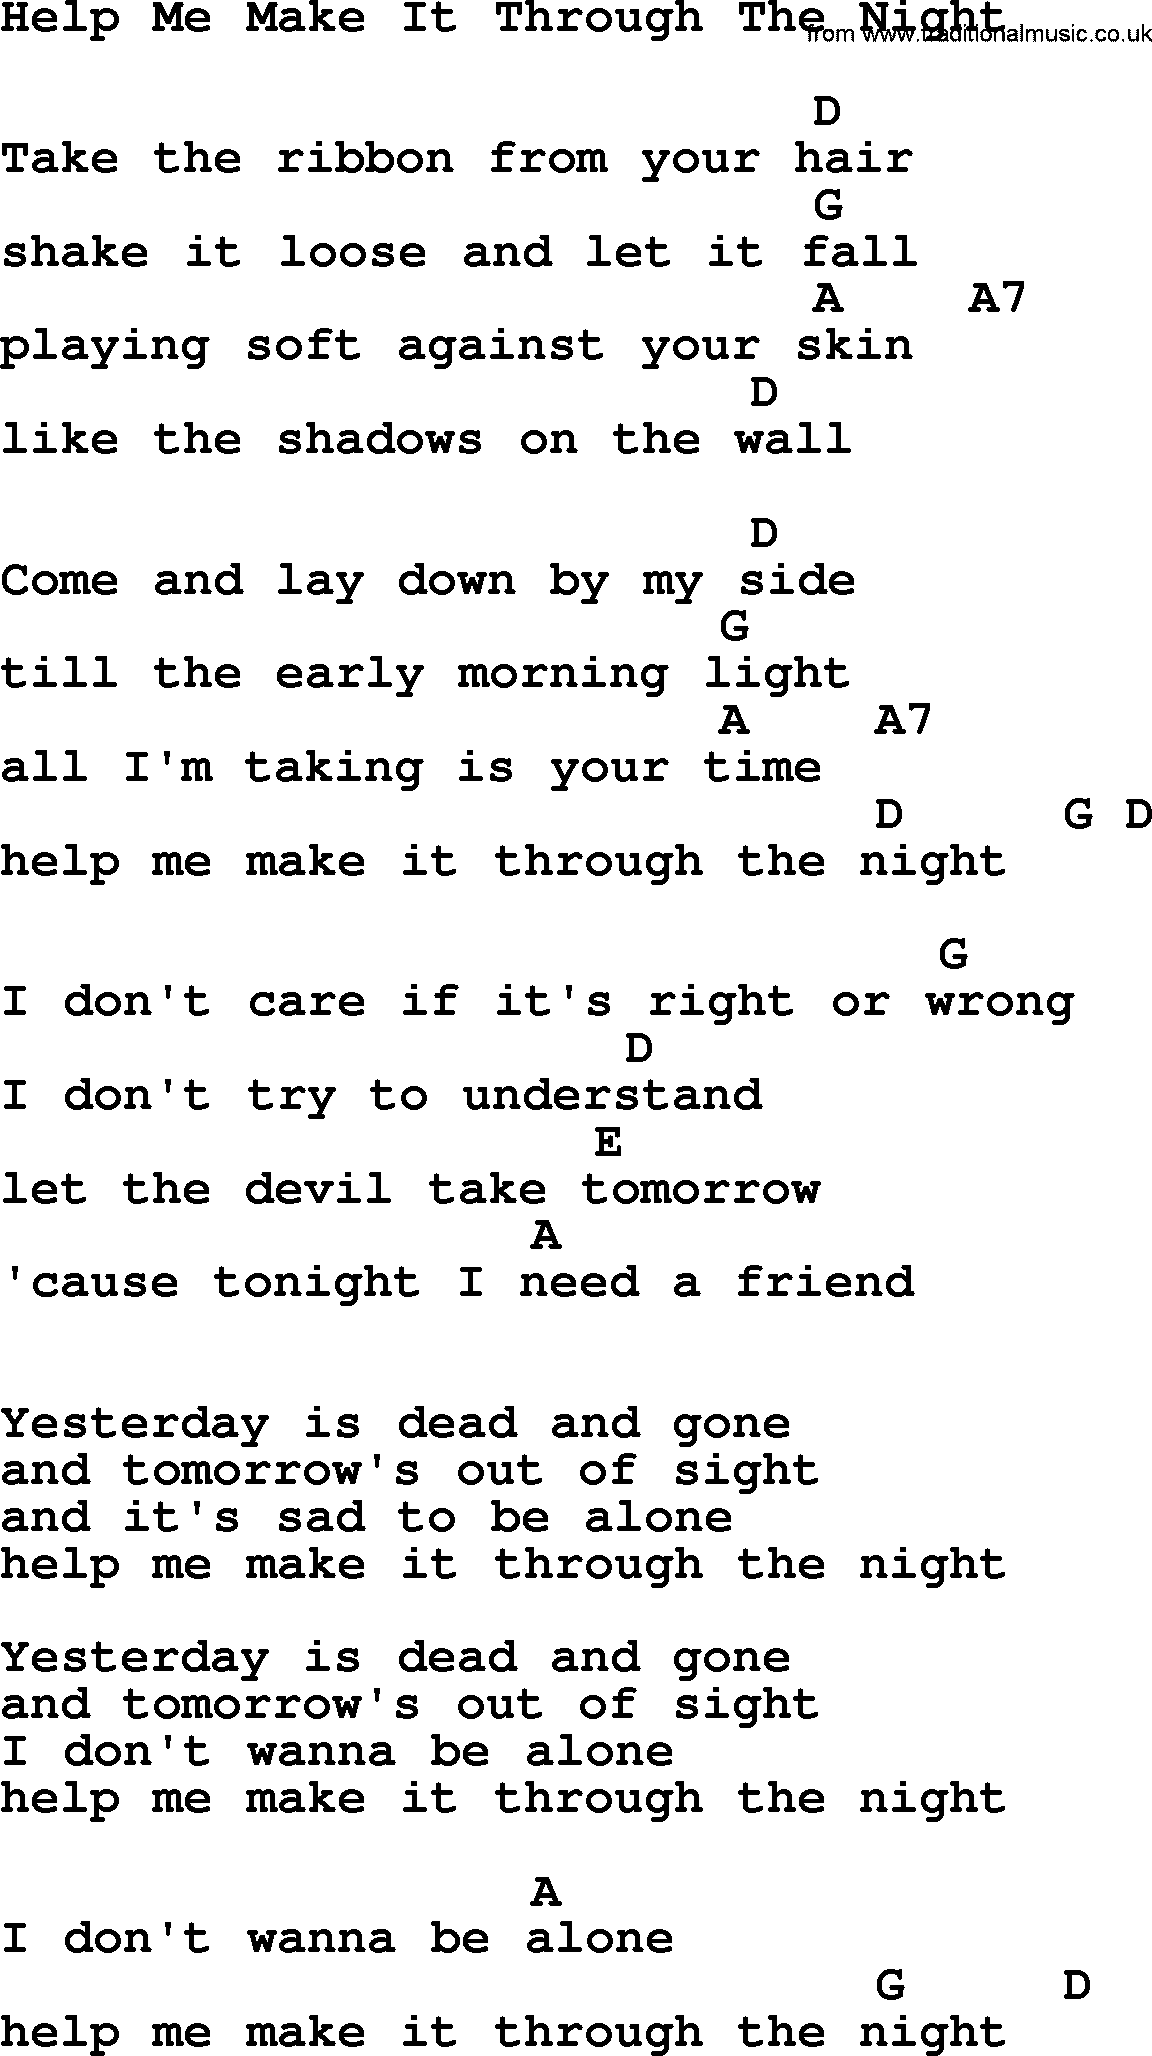 Willie Nelson song: Help Me Make It Through The Night, lyrics and chords